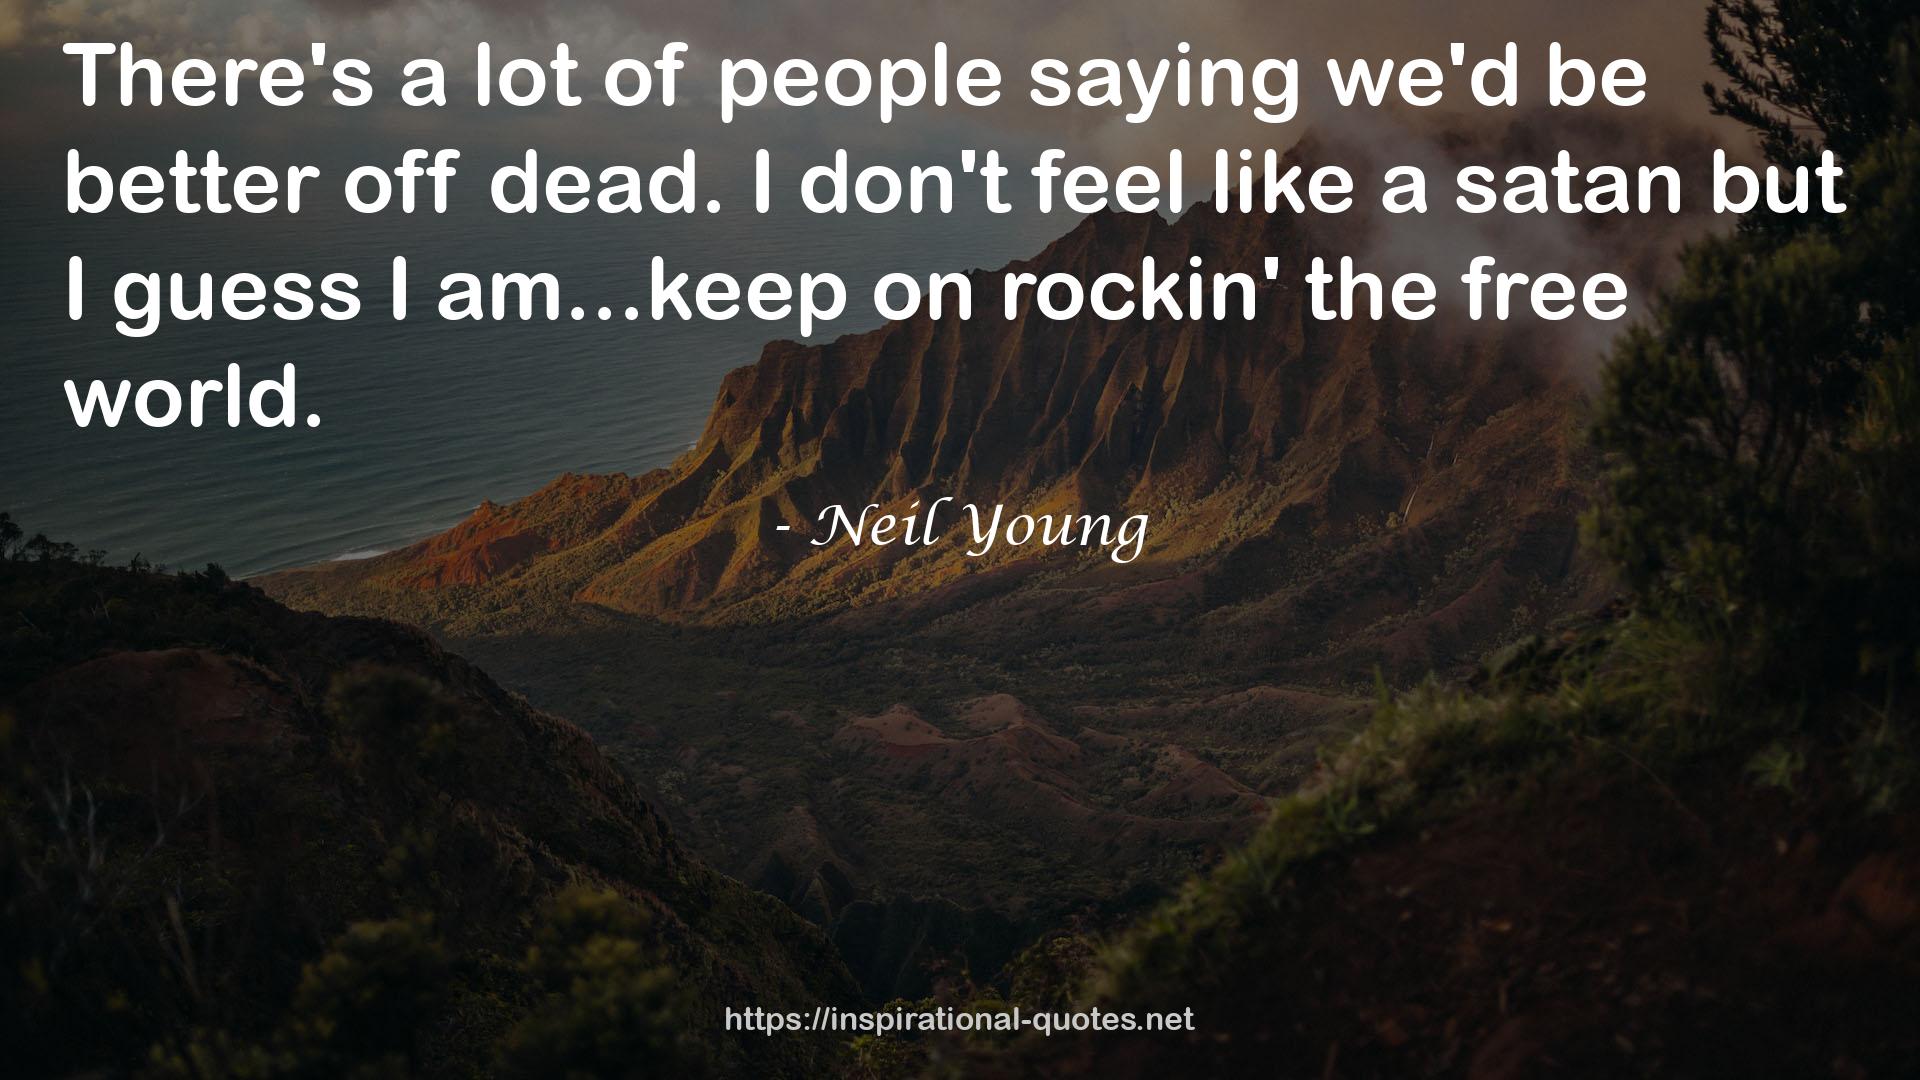 Neil Young QUOTES